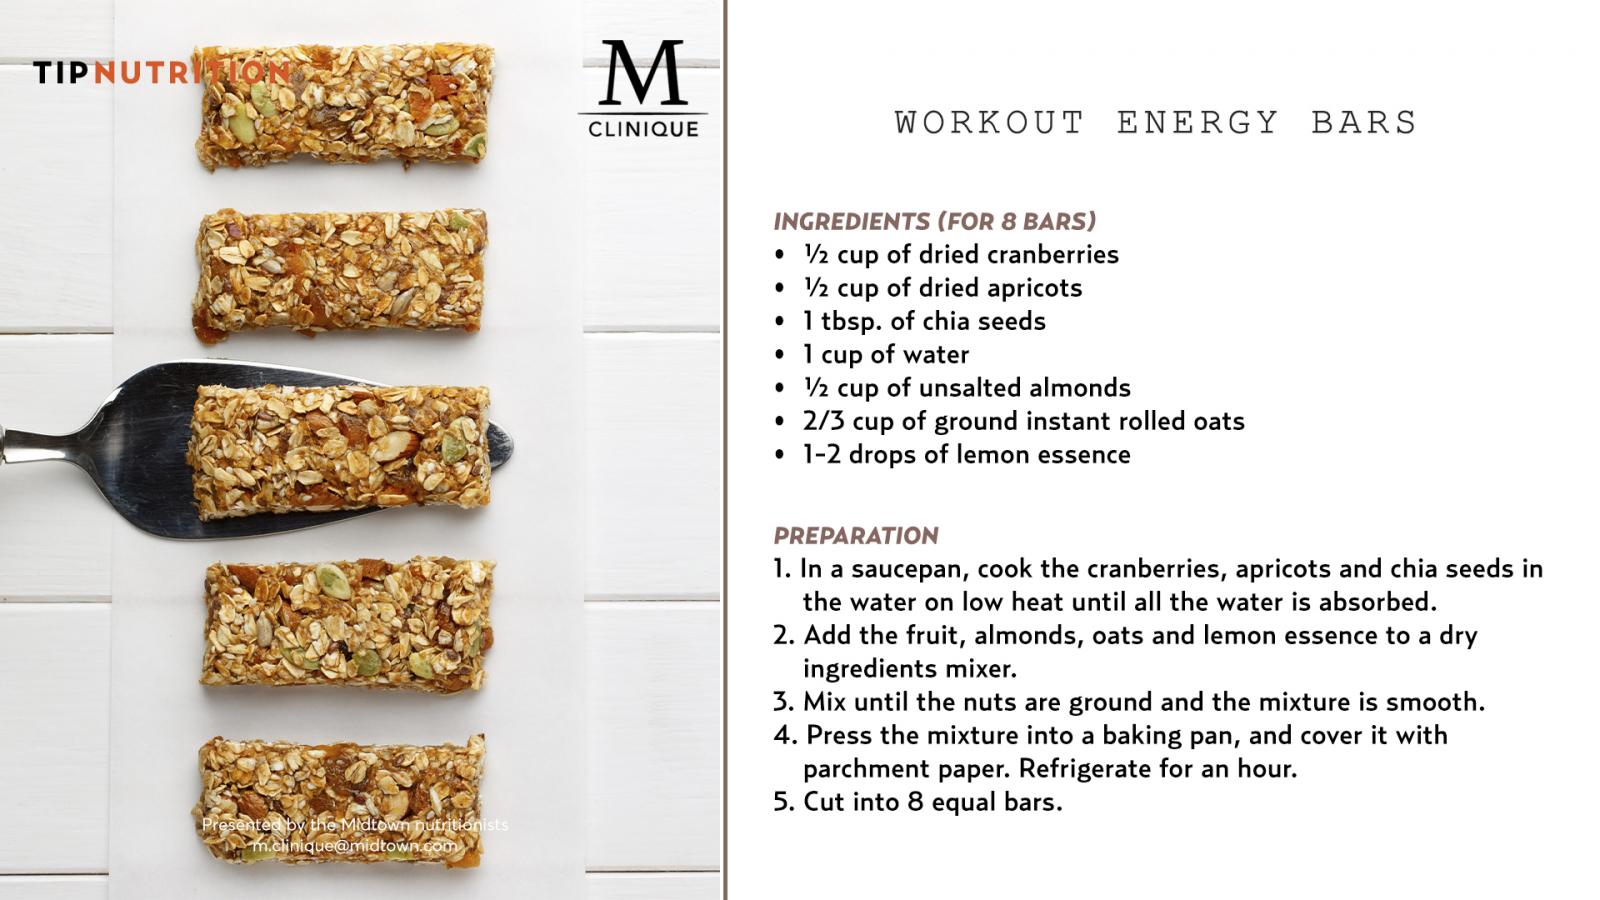 nutrition-energy bars-workout